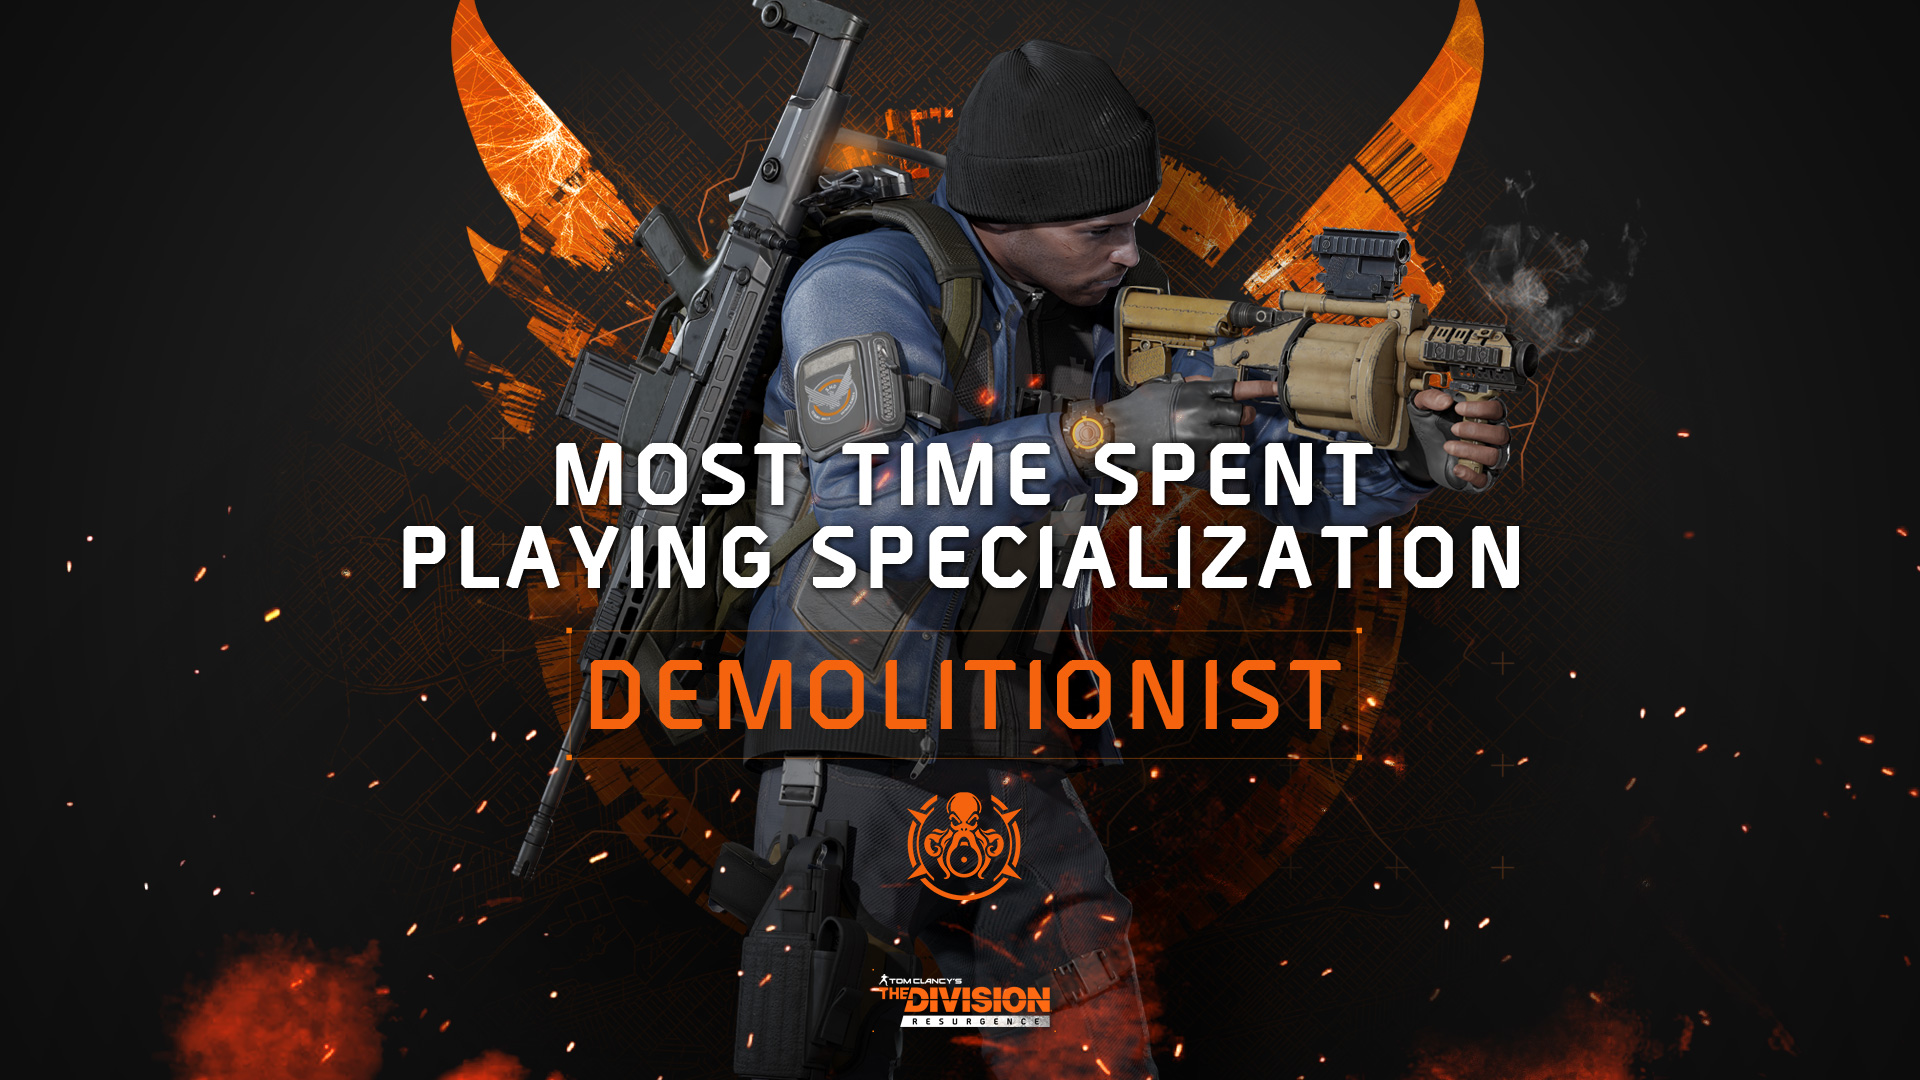 The Division Resurgence on Twitter: "Did you play in the last test? Which specialization did you enjoy most? #Resurgence #TheDivisionMobile #TheDivision https://t.co/blMUMJnbfo" / Twitter